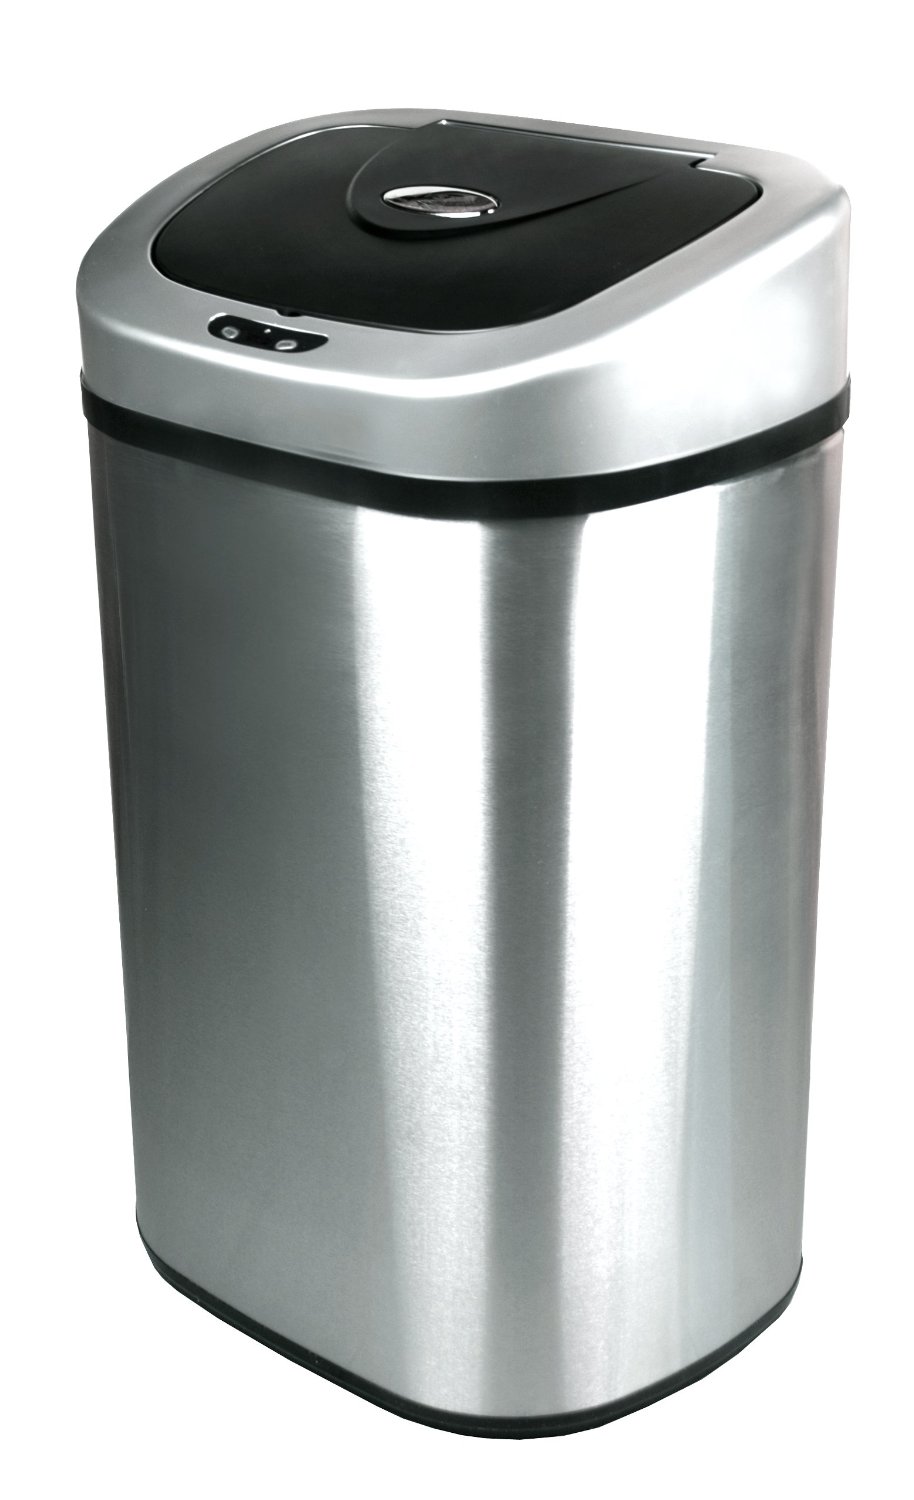 Nine Stars Infrared Touchless Stainless Steel Trash Can (21.1-Gallon)  $72.99